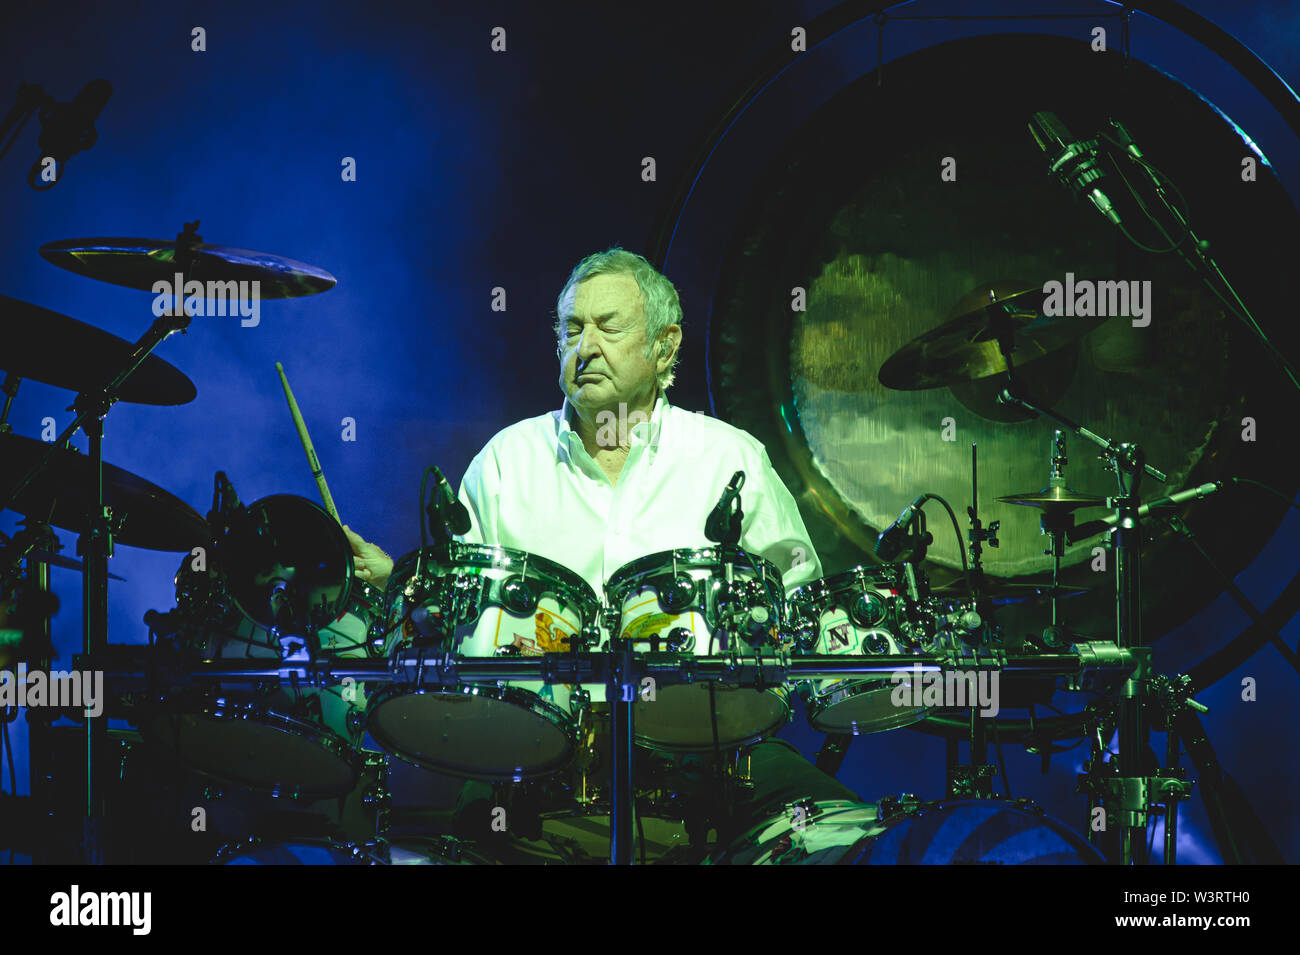 Nick Mason's Saucerful Of Secrets, the band led by Pink Floyd drummer, on tour this summer in Italy.Nick Mason's Saucerful Of Secrets are formed by Nick Mason, Gary Kemp, Guy Pratt, Lee Harris and Dom Beken. The concerts celebrate the first Pink Floyd musical works and include songs taken from the albums 'The Piper At The Gates of Dawn' and 'A Saucerful Of Secrets'. (Photo by Fabrizio Di Bitonto / Pacific Press) Stock Photo